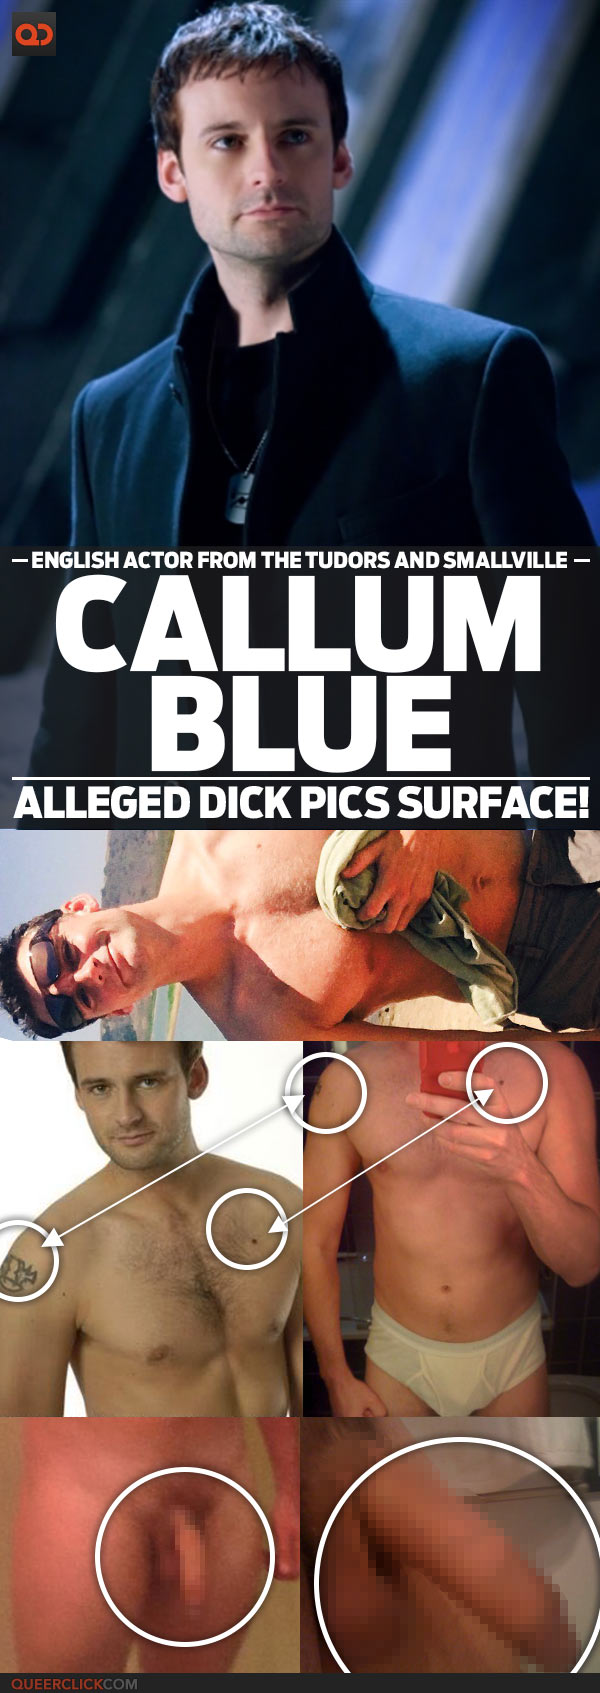 Callum Blue, English Actor From The Tudors And Smallville, Alleged Dick Pics Surface!